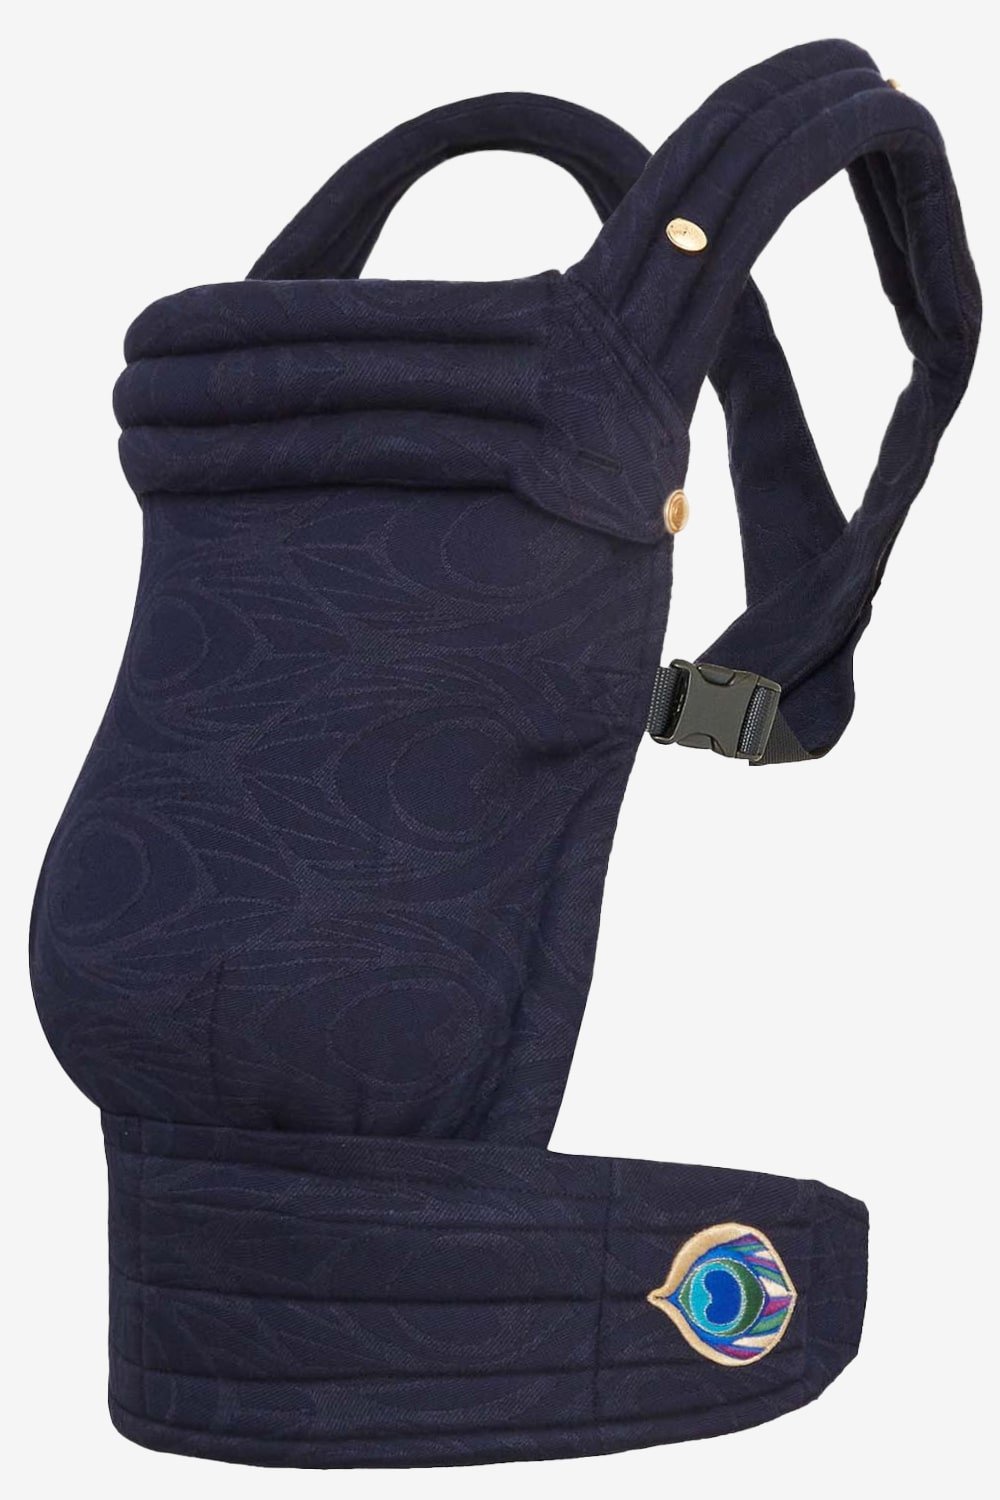 Blue baby carrier with an peacock feather print in a hemp blend